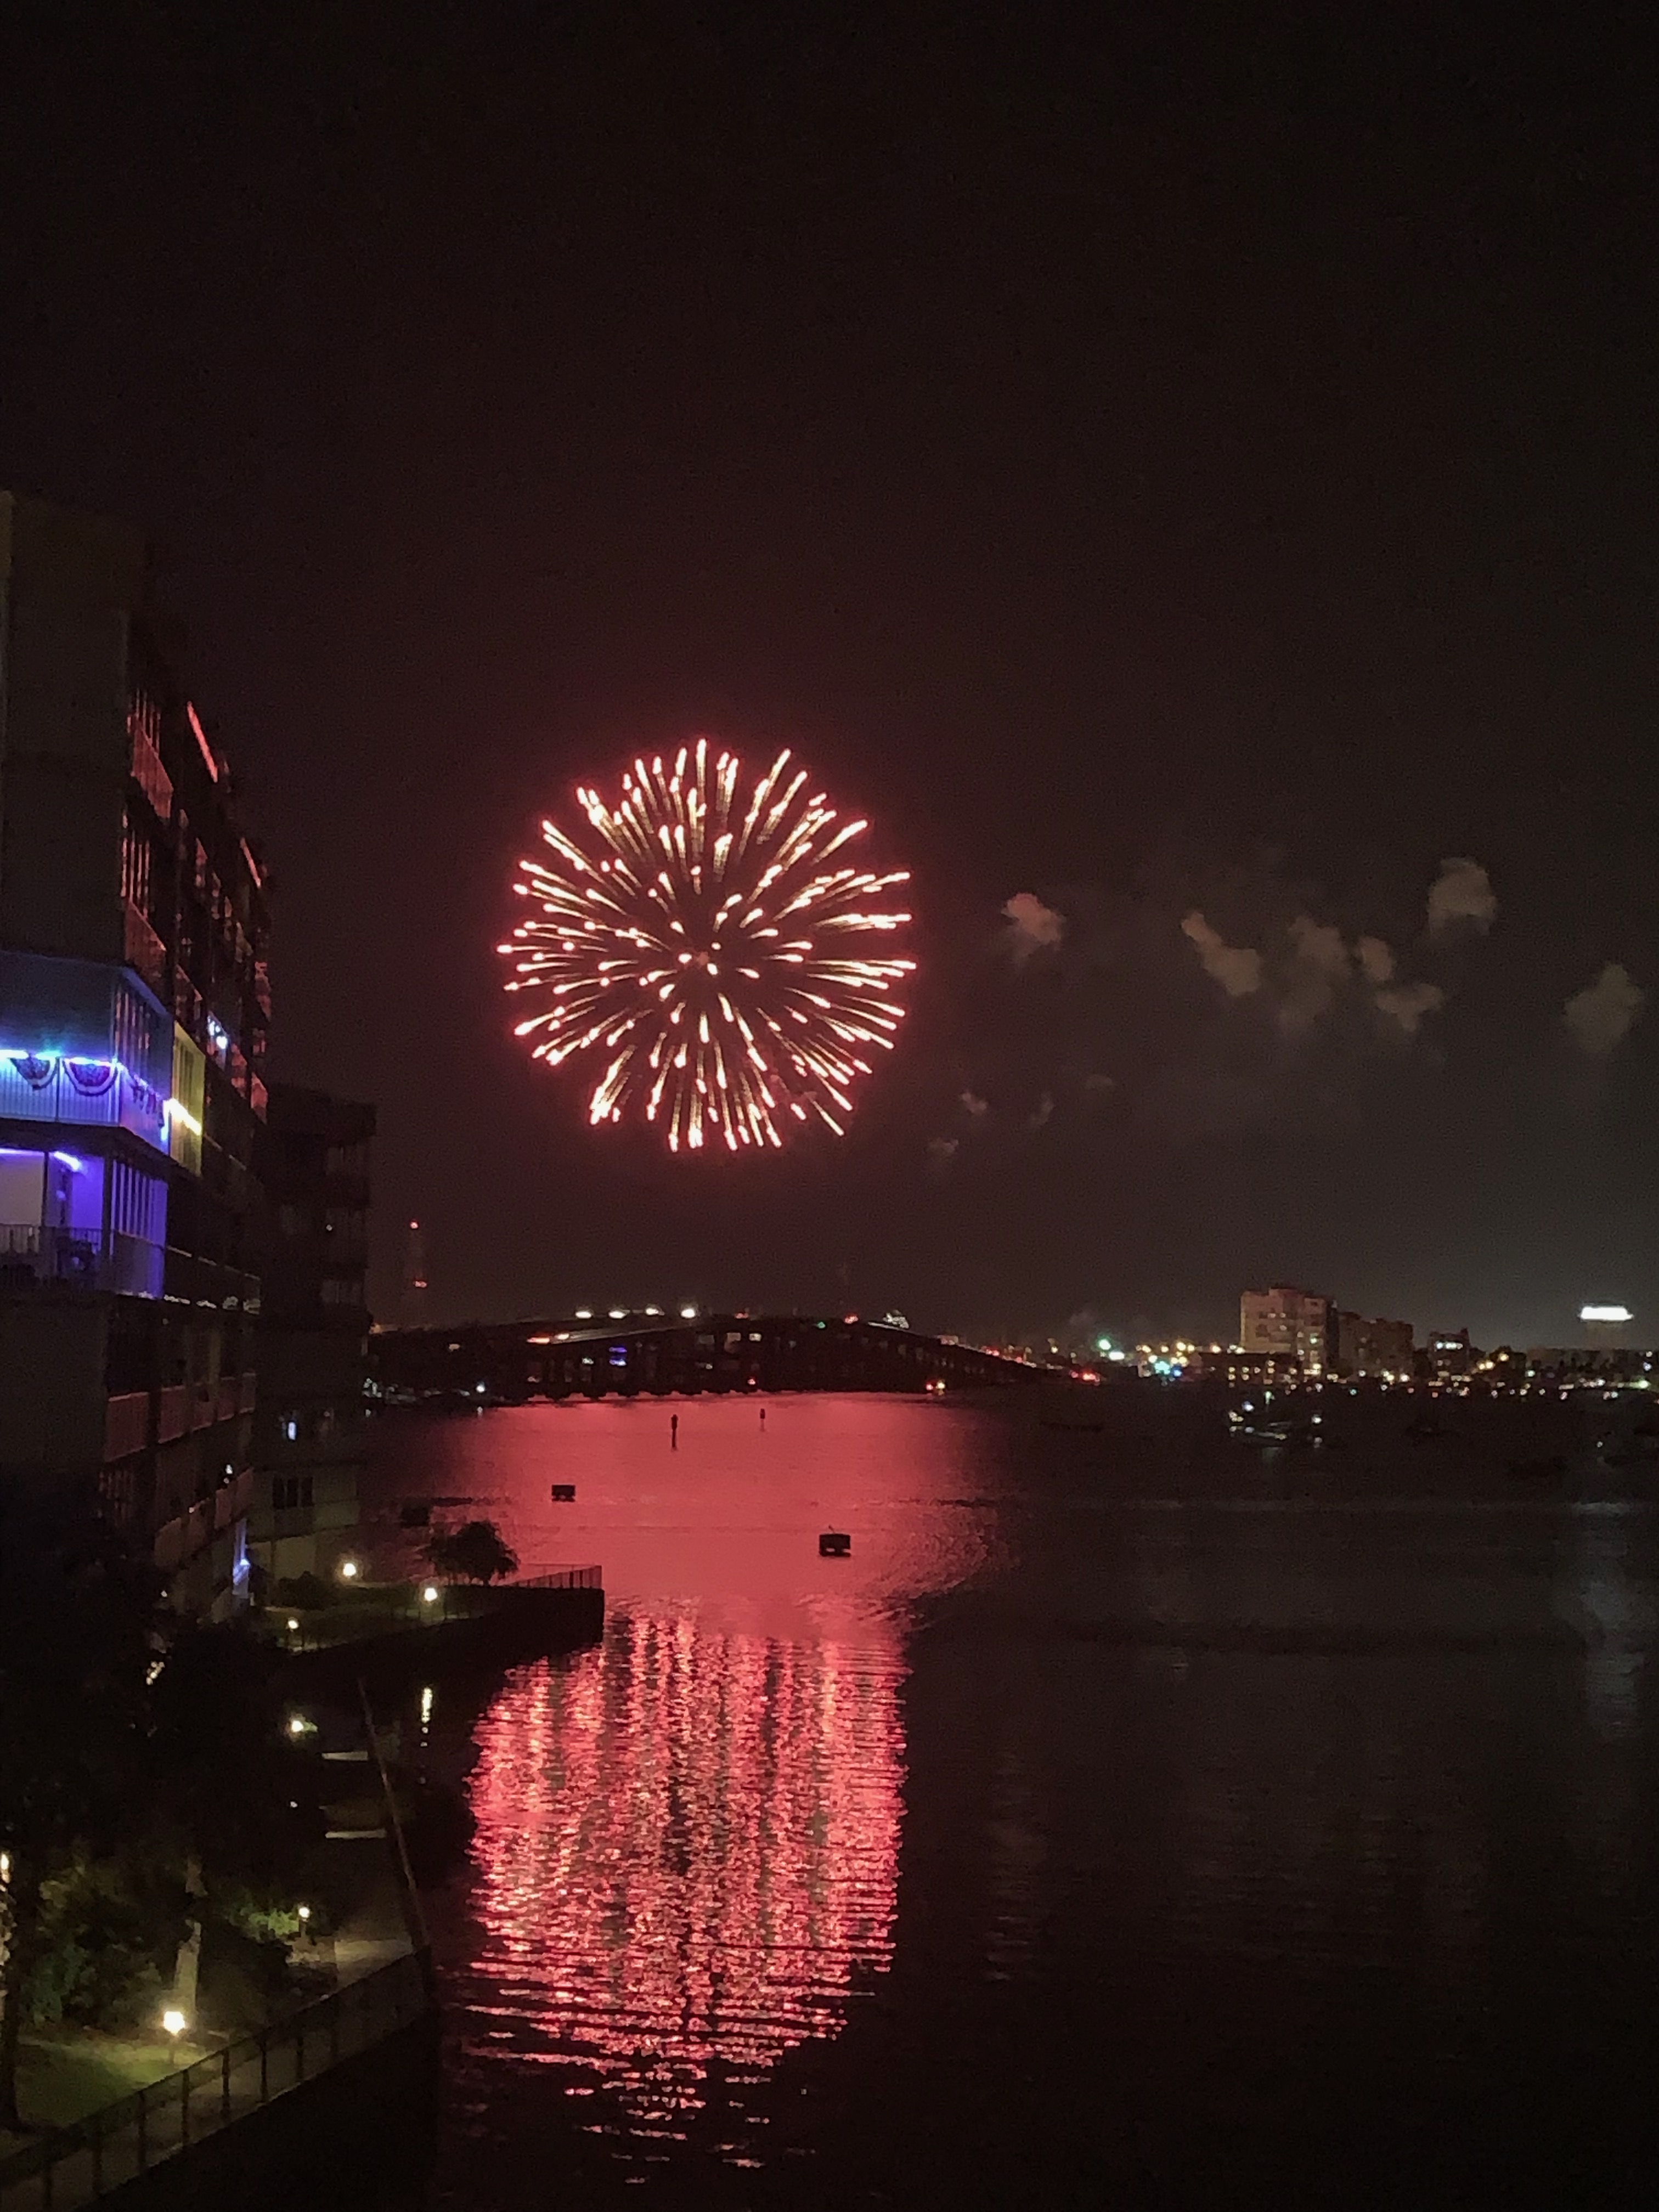 Fireworks over Cocoa Village July 4th 2019 taken by Bldg 480 resident GM (iPhone XS Max)